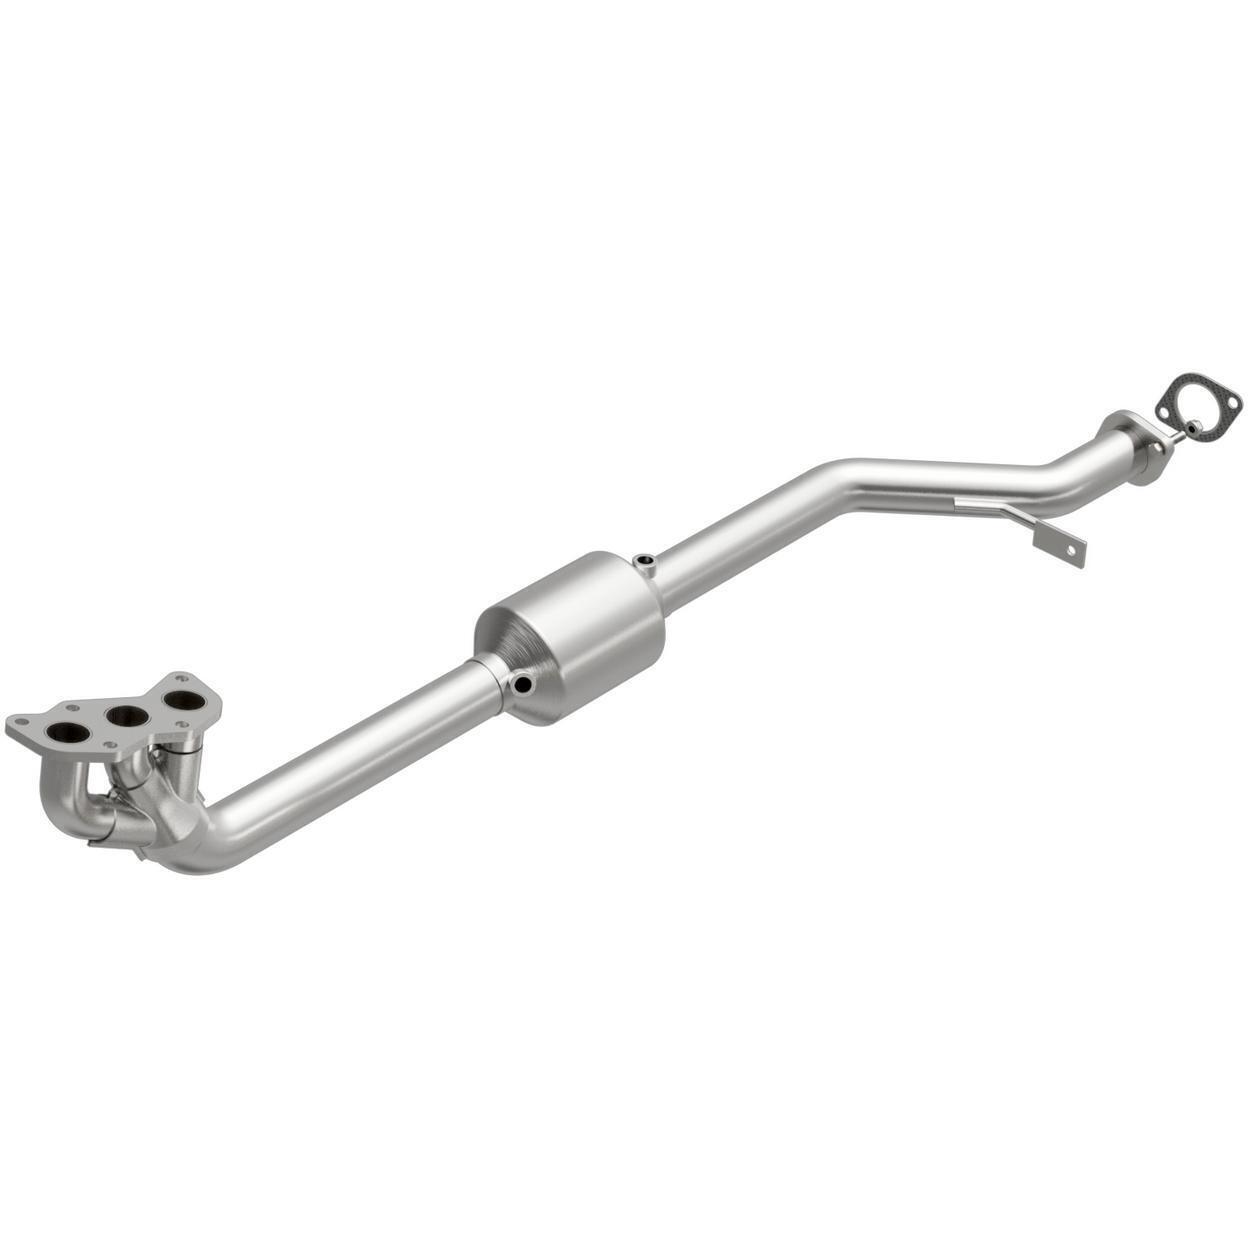 MagnaFlow 51603-AG Fits 2006 2007 Subaru B9 Tribeca Catalytic Converter with Int